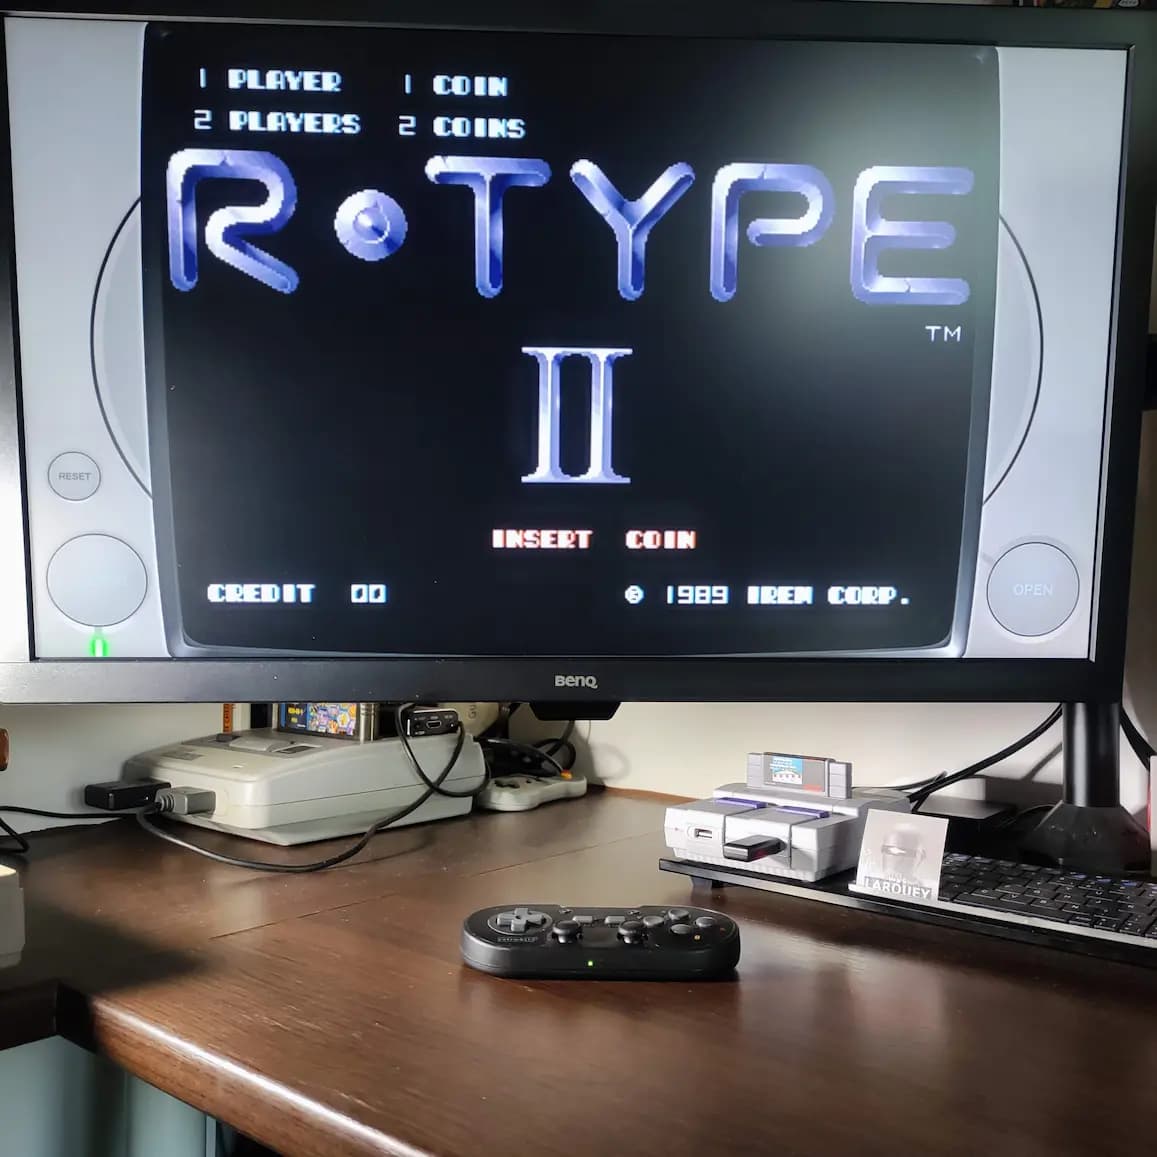 Larquey: R-Types: R-Type II [3 Lives/Very Hard] (Playstation 1 Emulated) 51,300 points on 2022-09-04 06:36:30